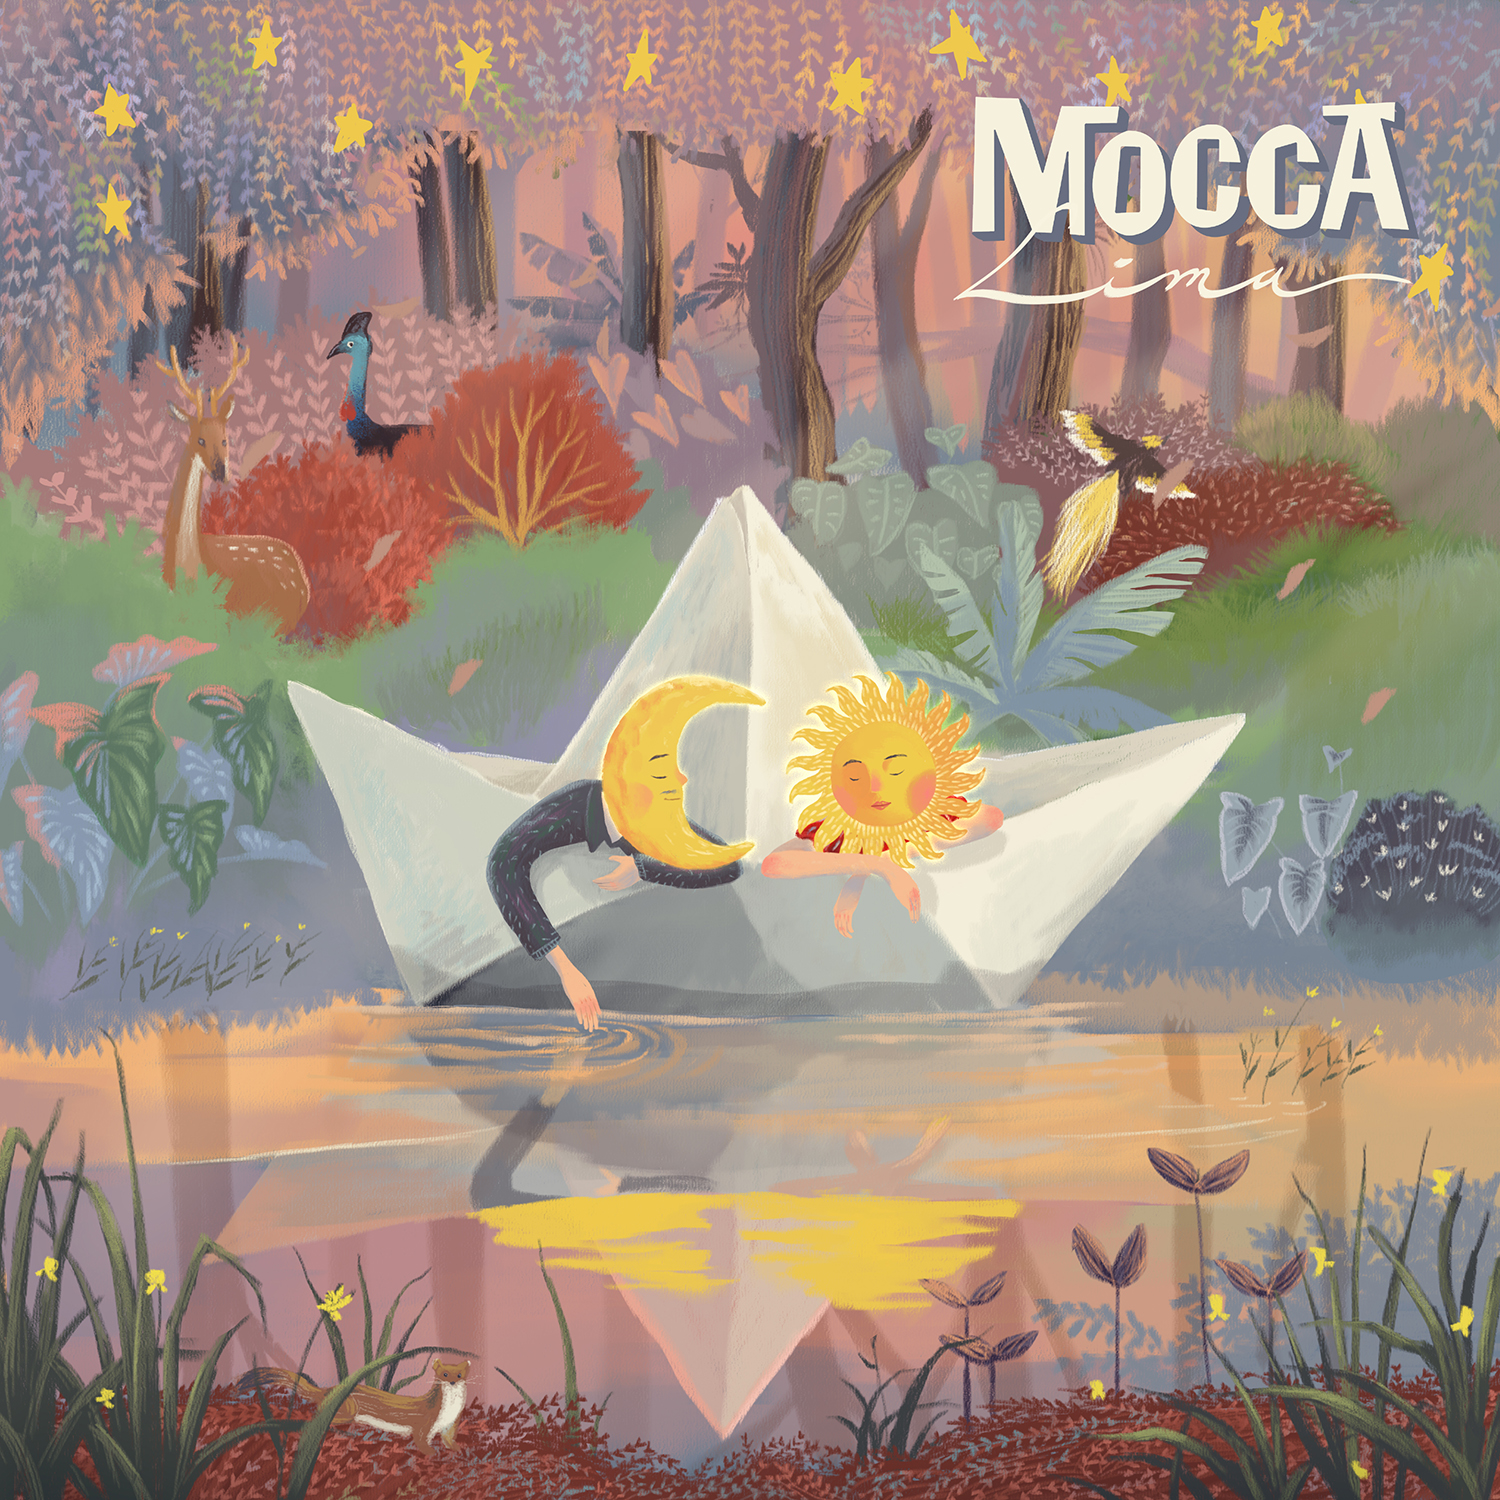 Mocca - Lima (Full Song)